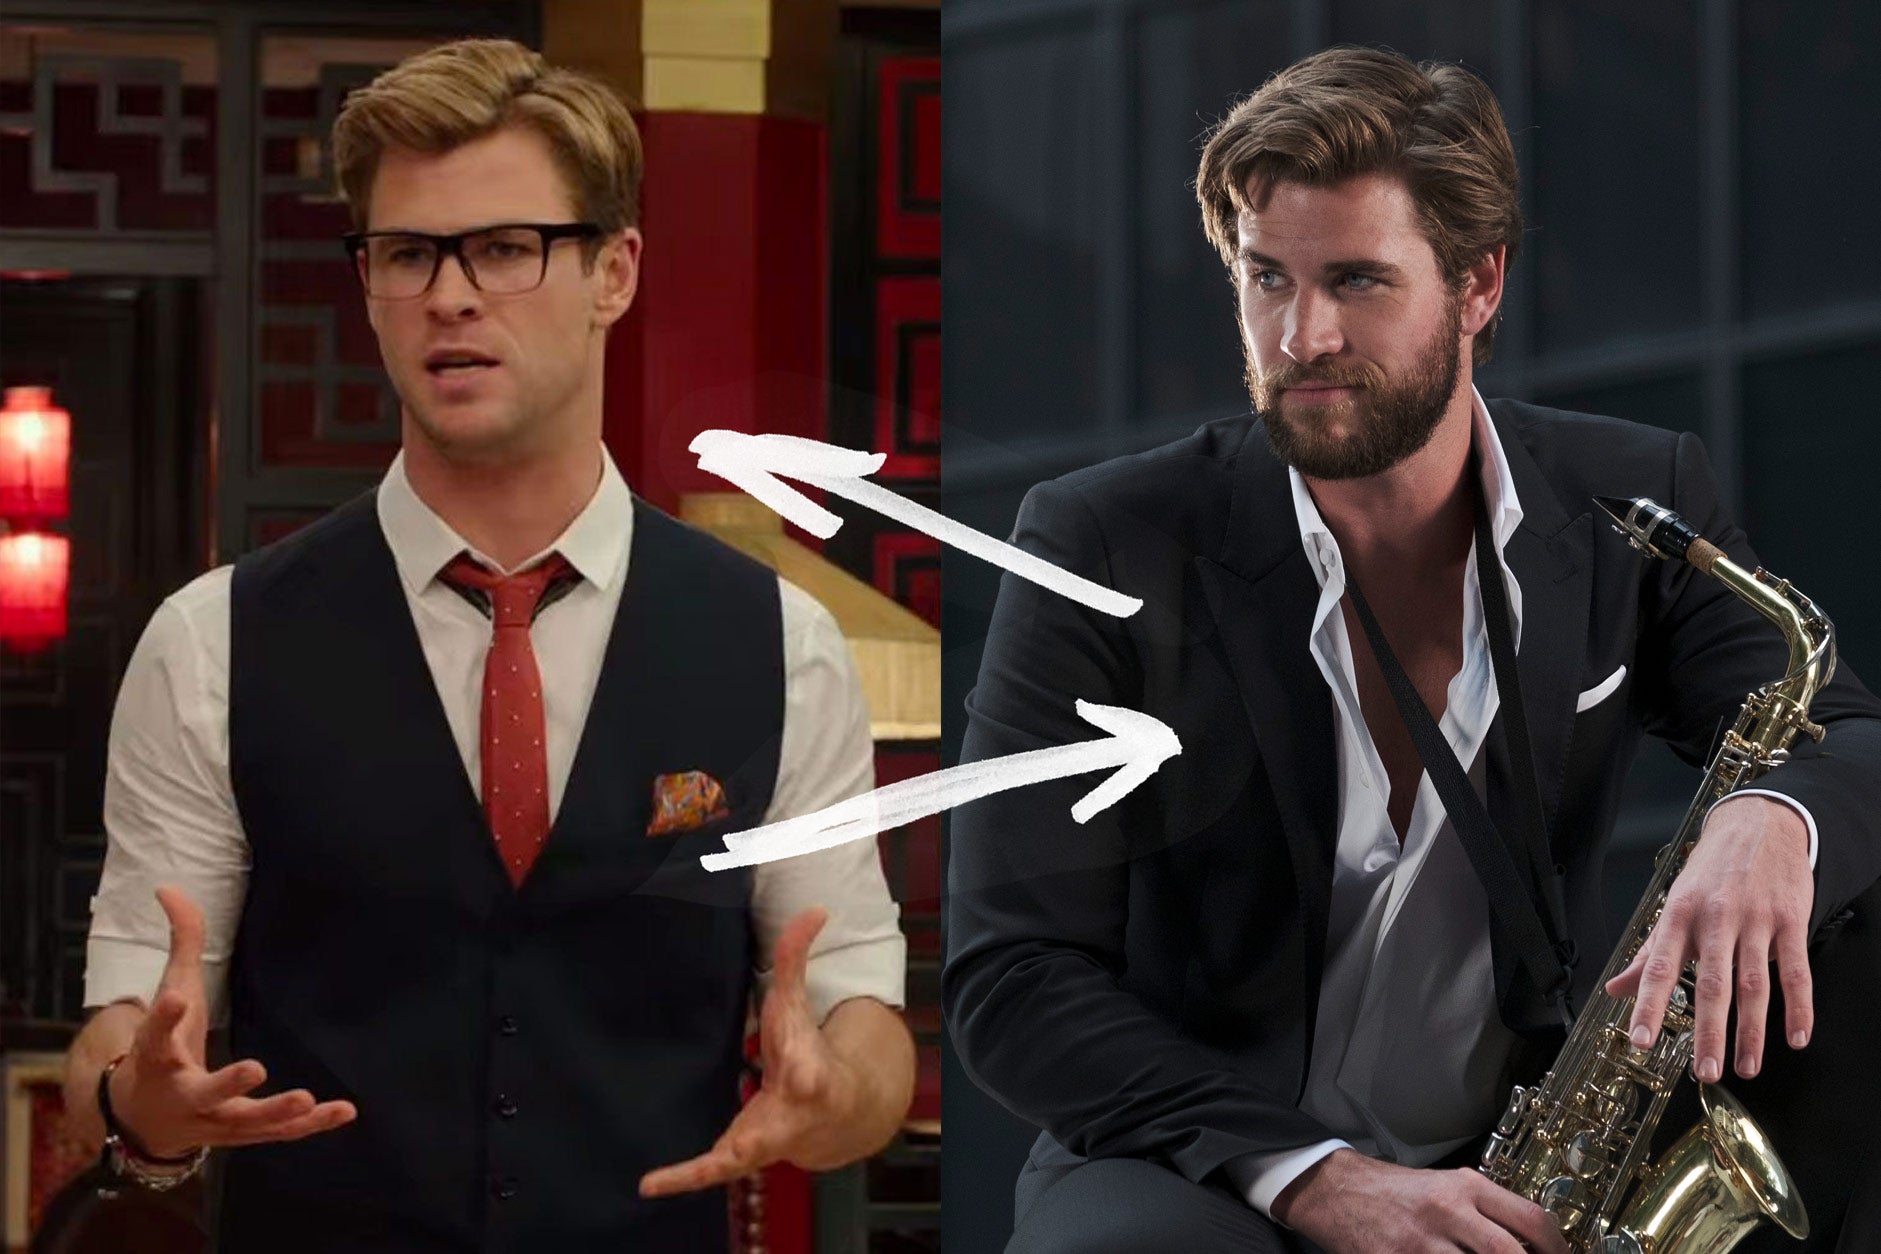 Side-by-side stills of Chris Hemsworth in Ghostbusters, wearing glasses, a tie, and vest, and Liam Hemsworth in Isn't It Romantic, wearing a suit with a saxophone. They look a lot alike.